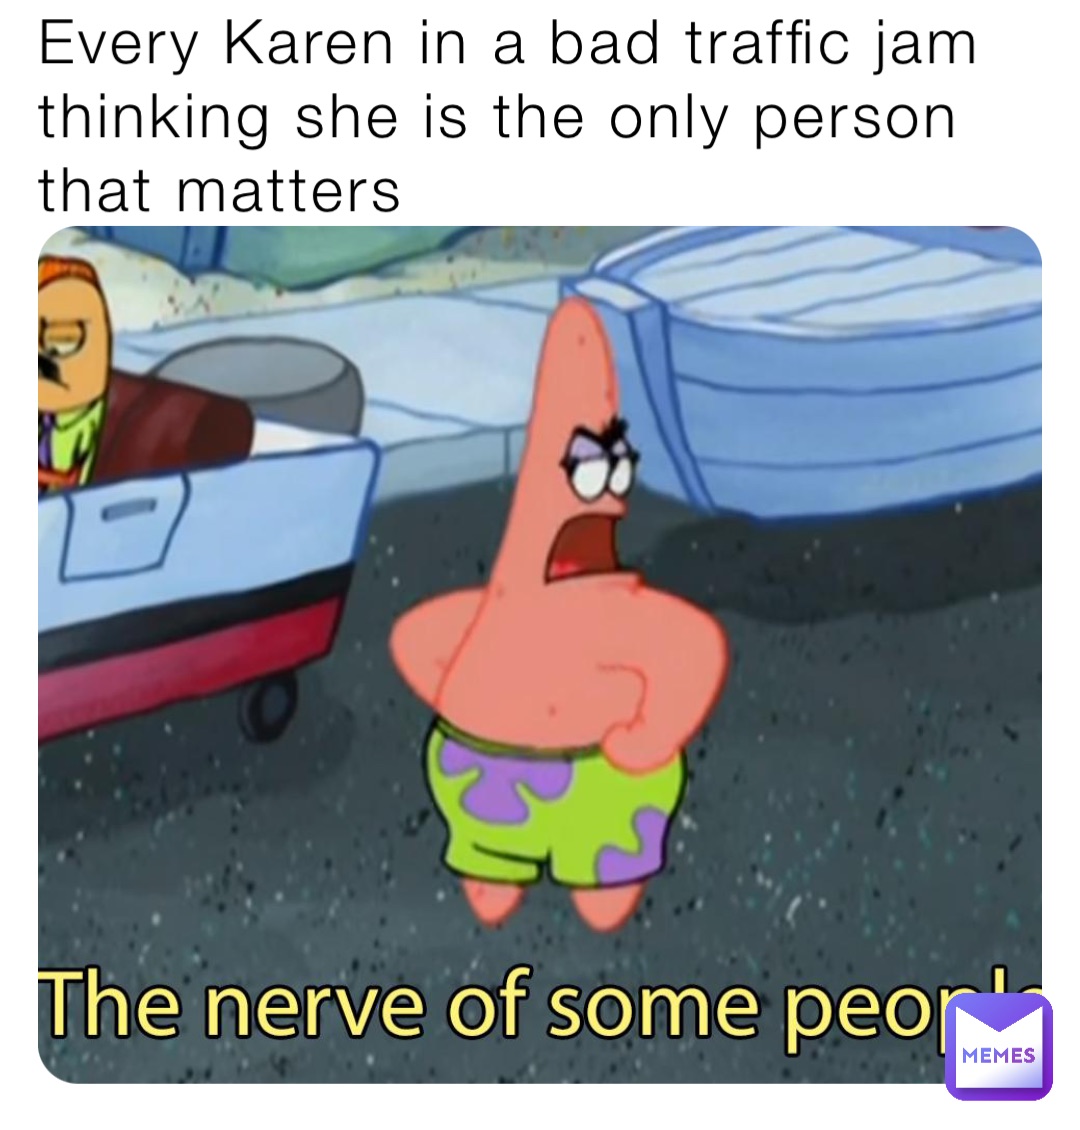 Every Karen in a bad traffic jam thinking she is the only person that matters